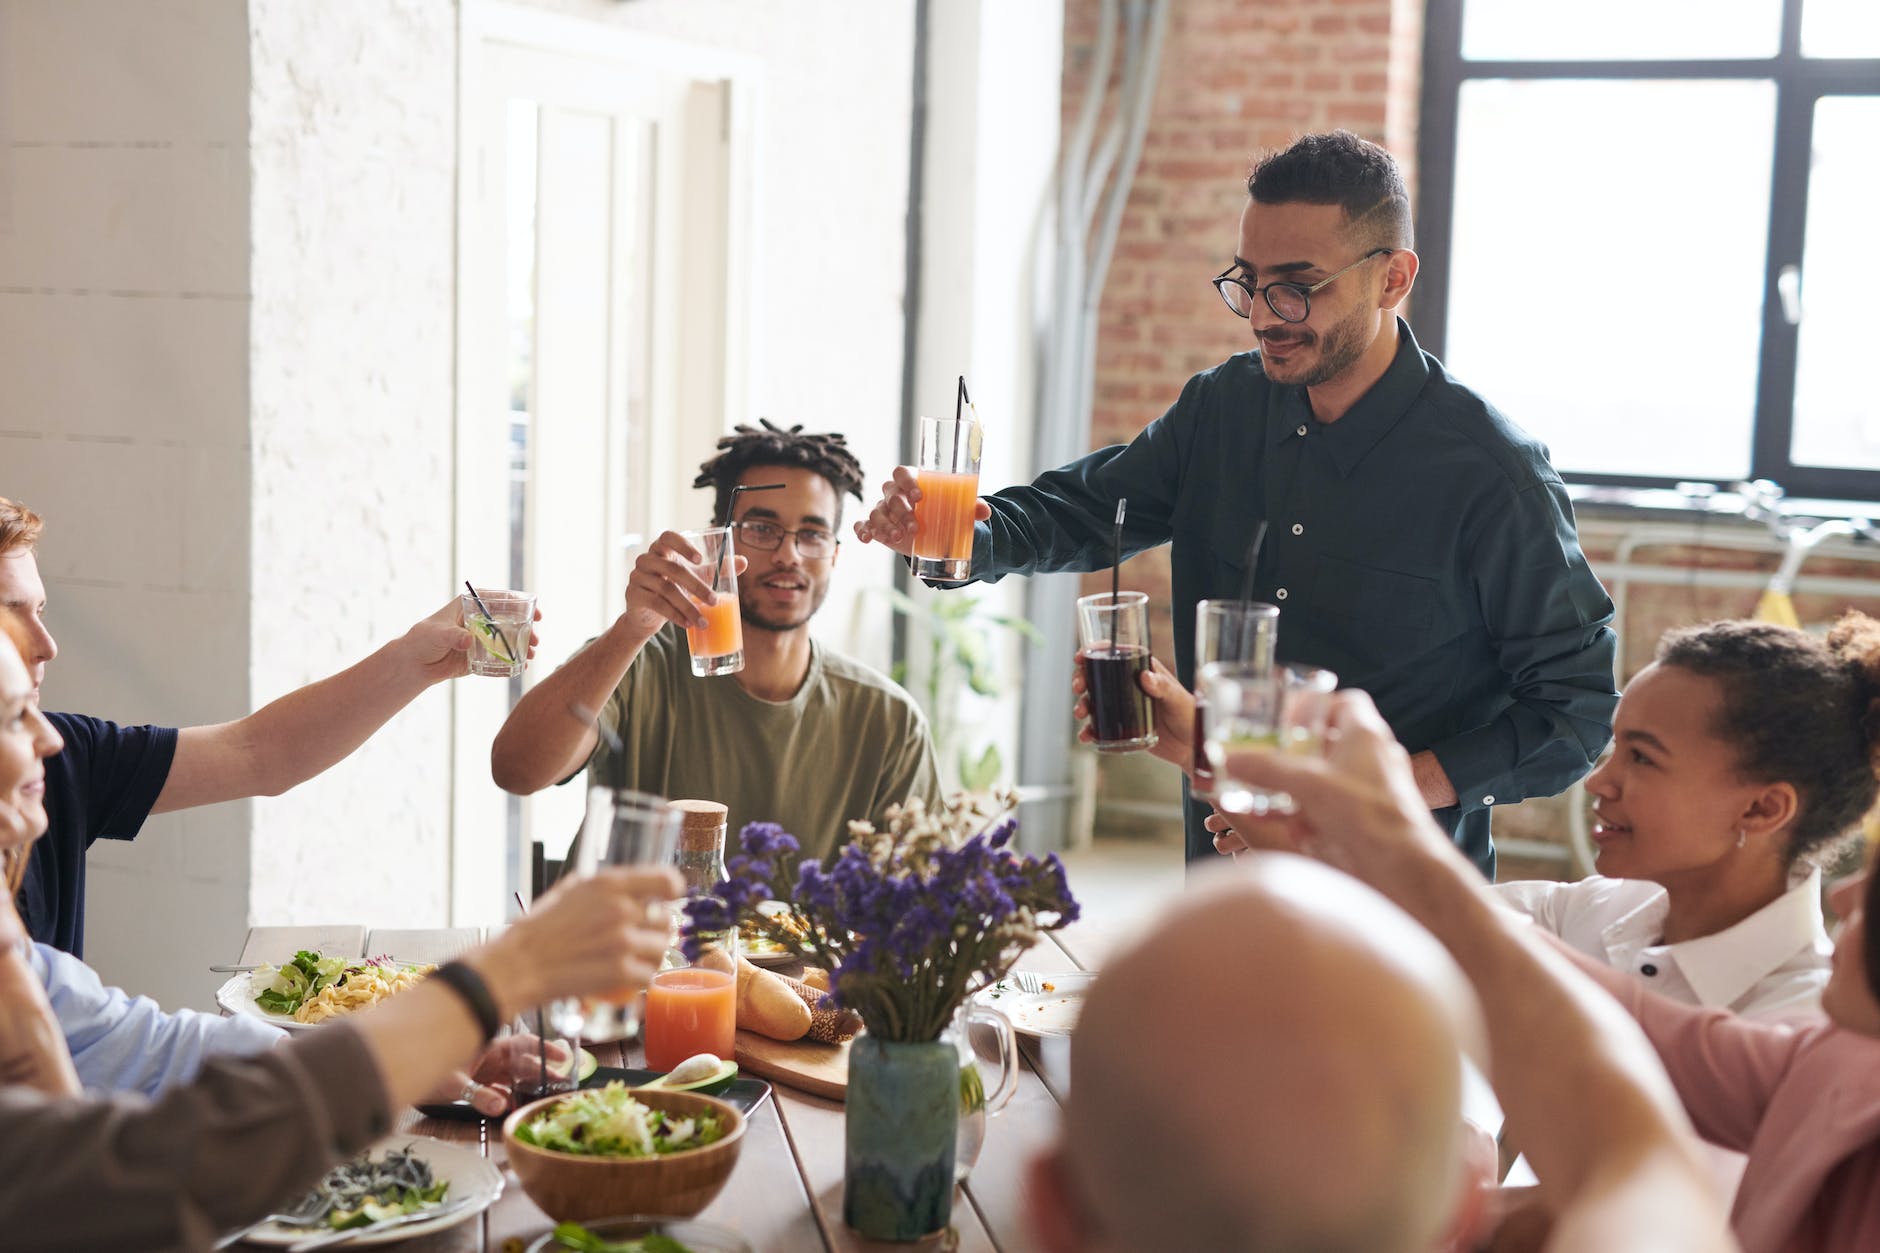 Seven Tips to Hosting a Stress-Free Holiday Party